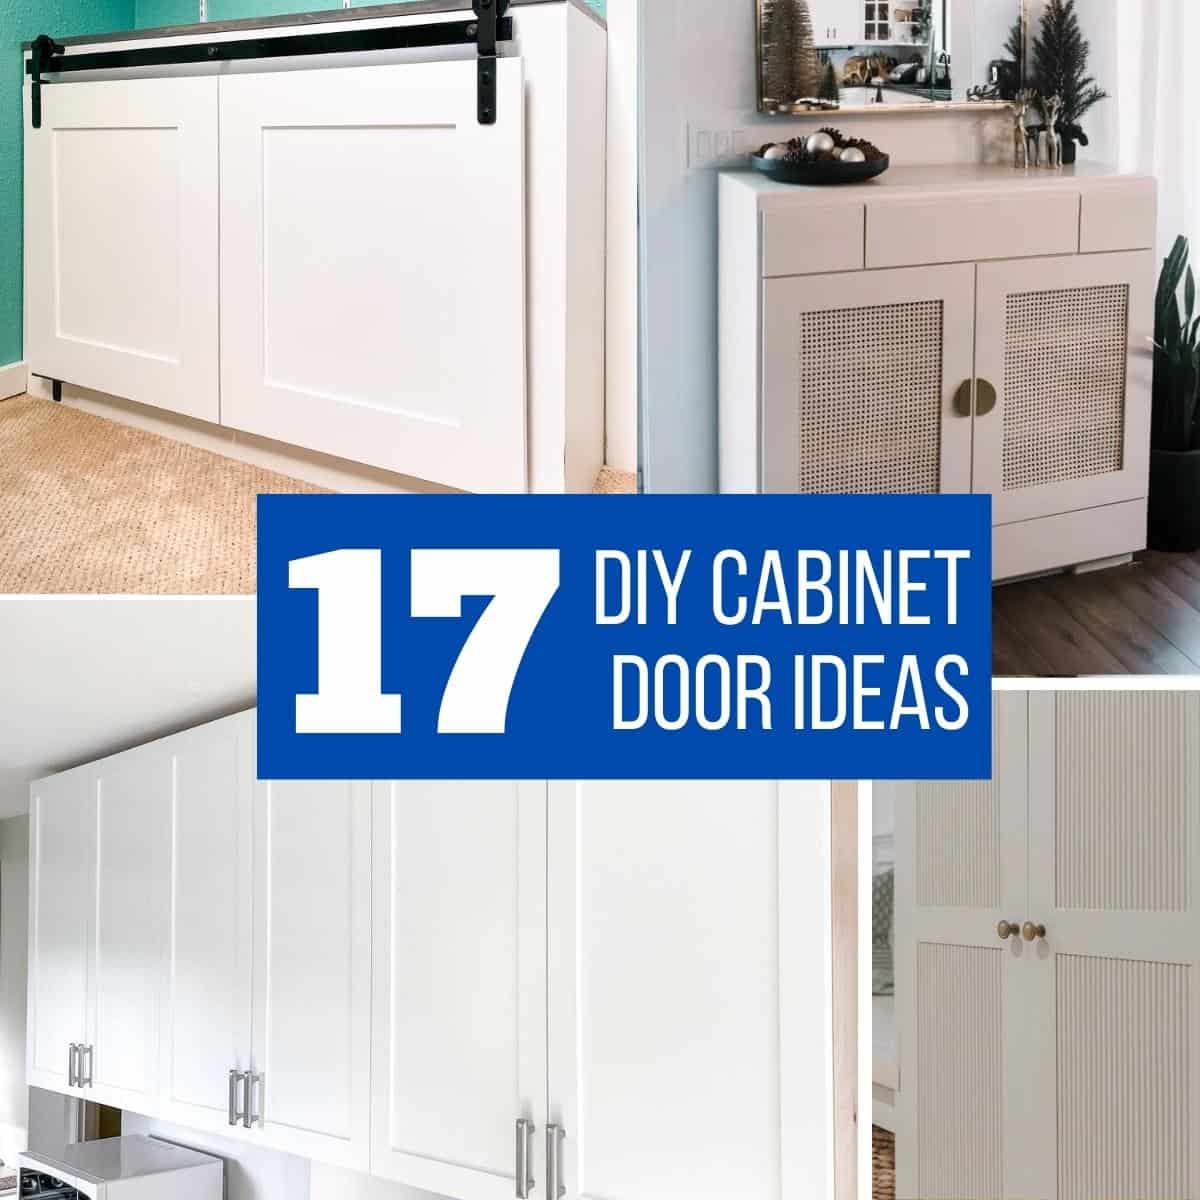 https://www.thehandymansdaughter.com/wp-content/uploads/2022/09/DIY-cabinet-door-ideas-featured-image.jpeg